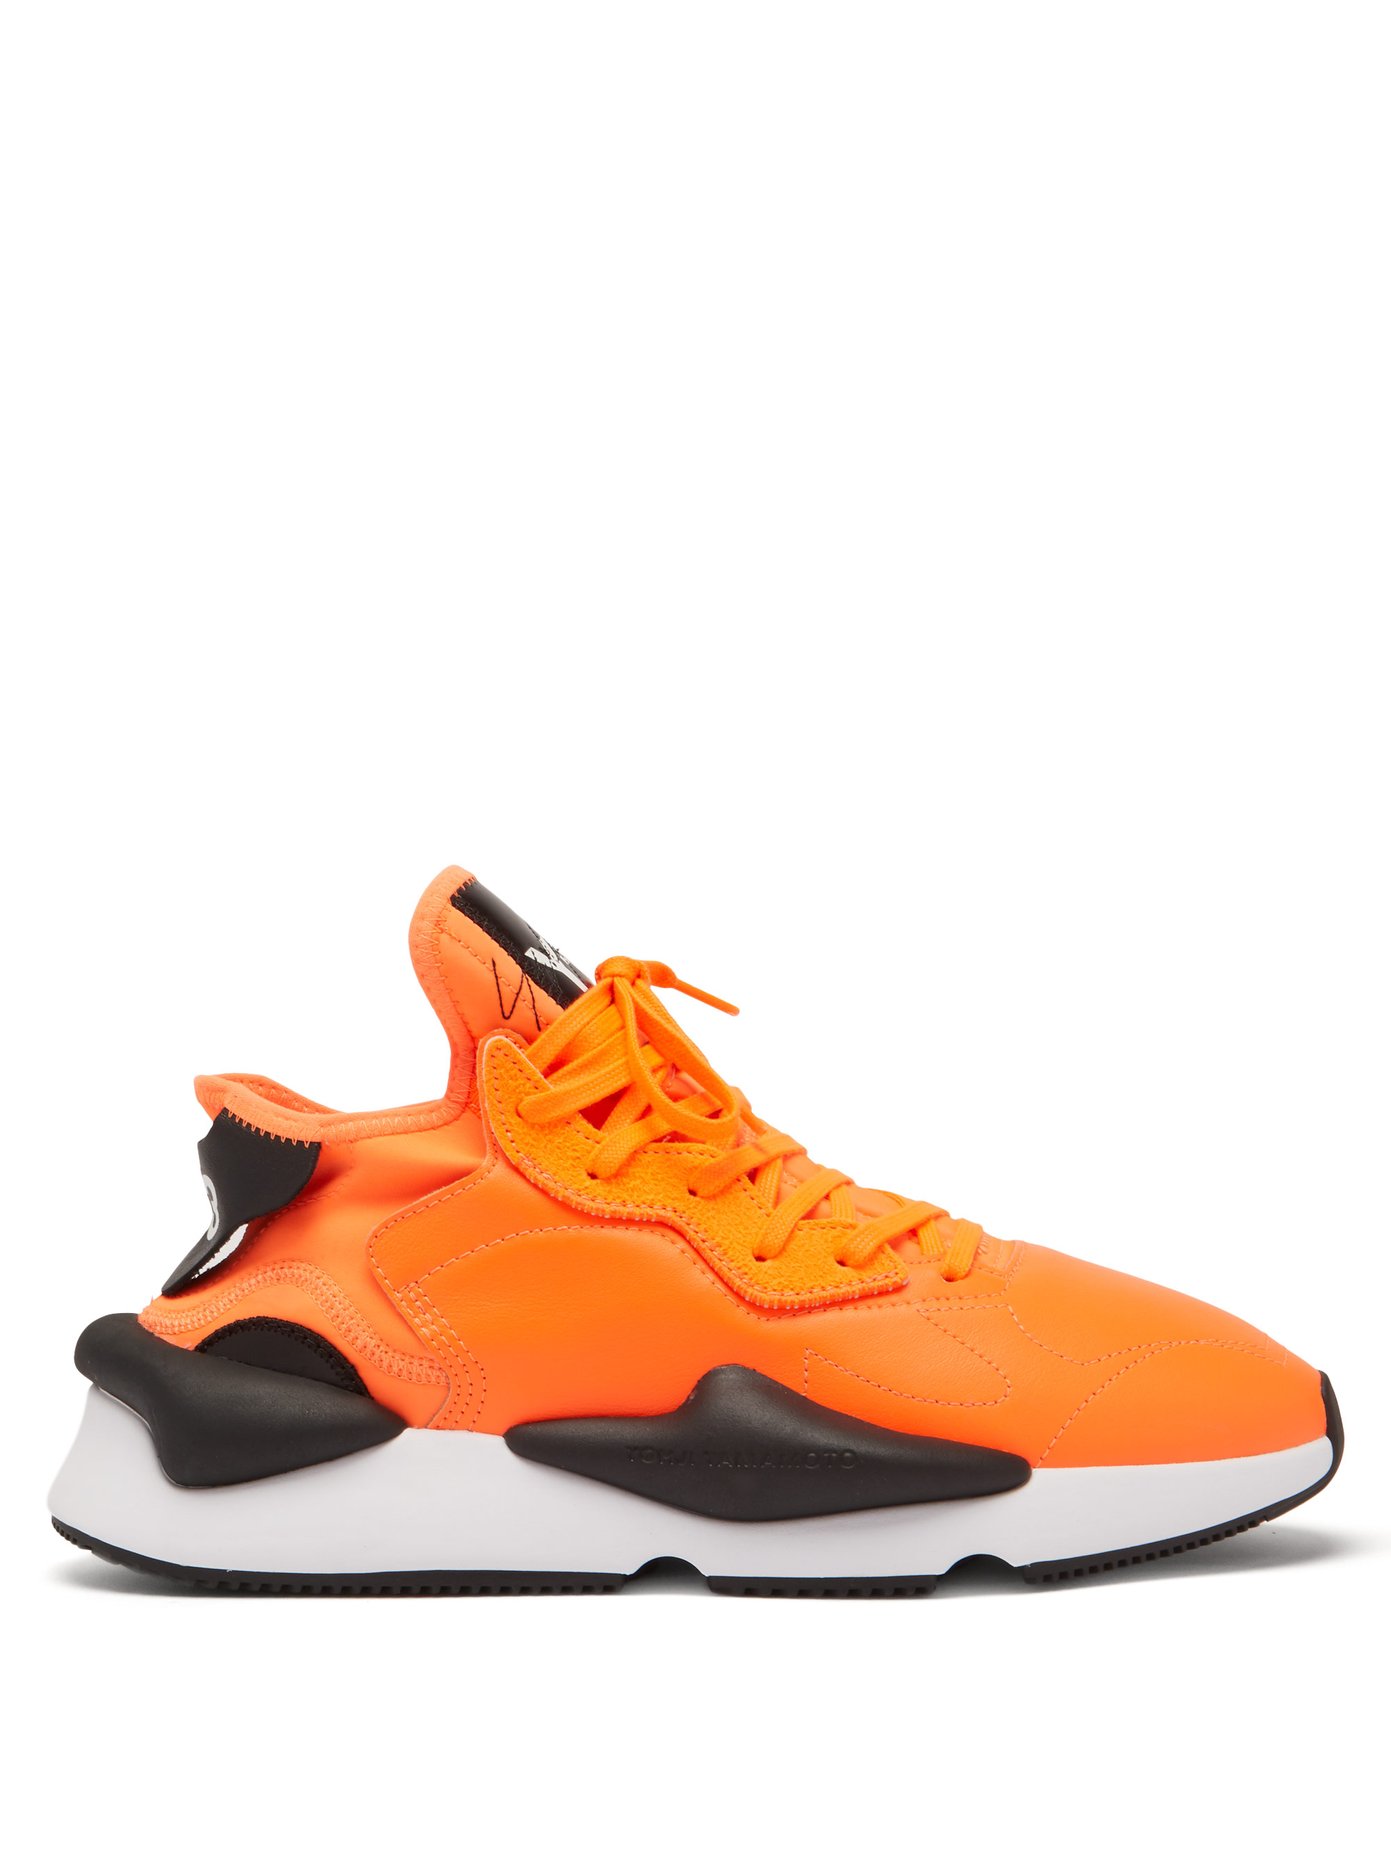 Kaiwa thick-sole leather trainers | Y-3 